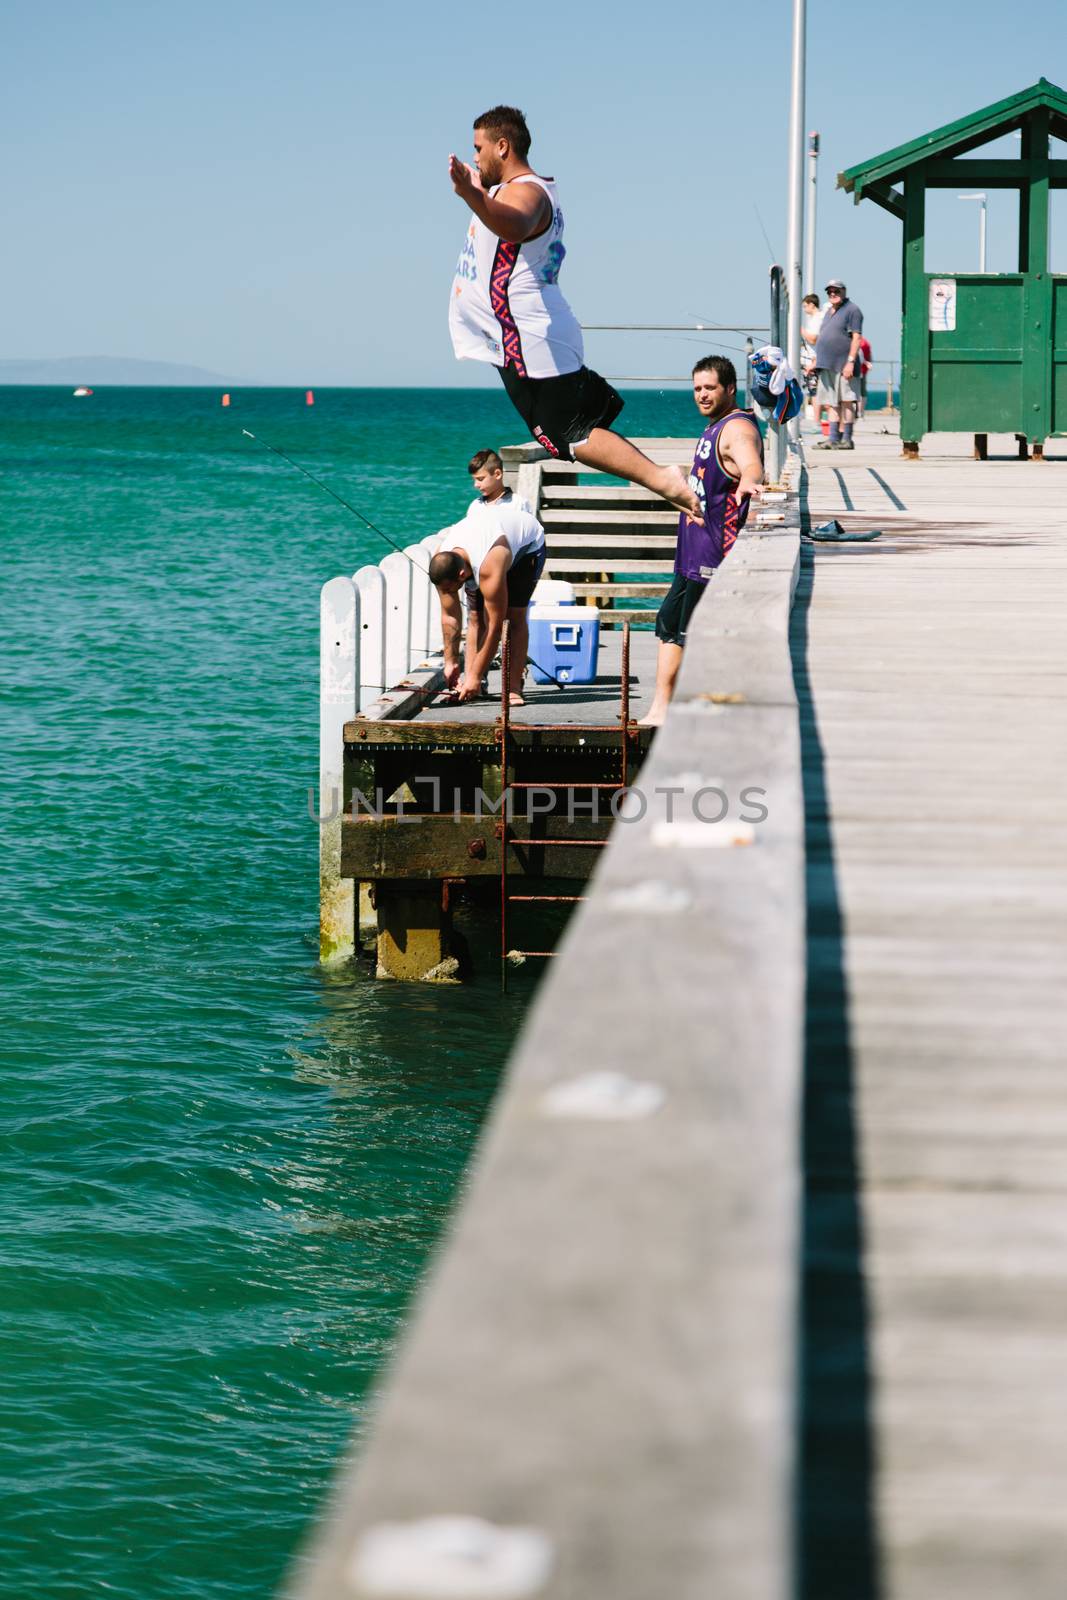 MELBOURNE/AUSTRALIA - FEBRUARY 6: Youths jump off a jetty into the water, while others fish in Mordialloc, a coastal suburb of Melbourne, Australia in February.